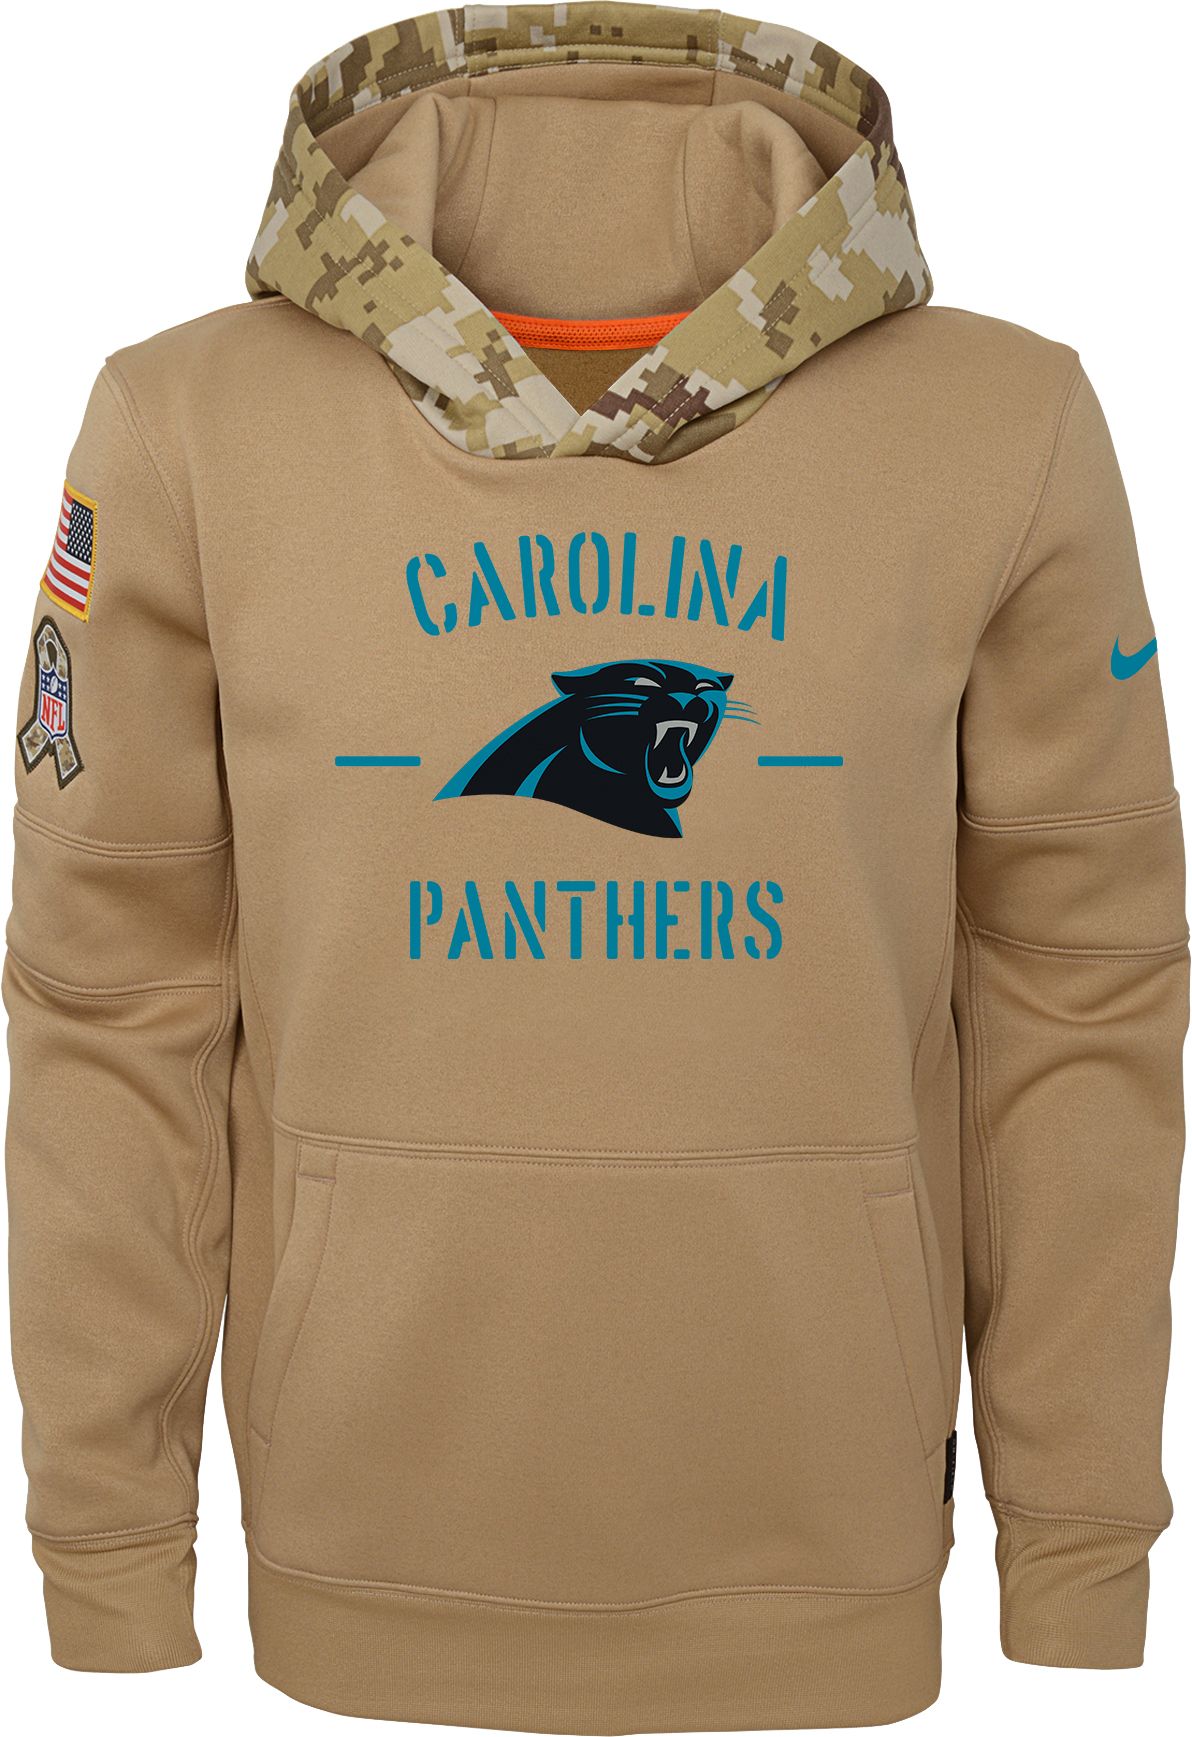 youth panthers hoodie